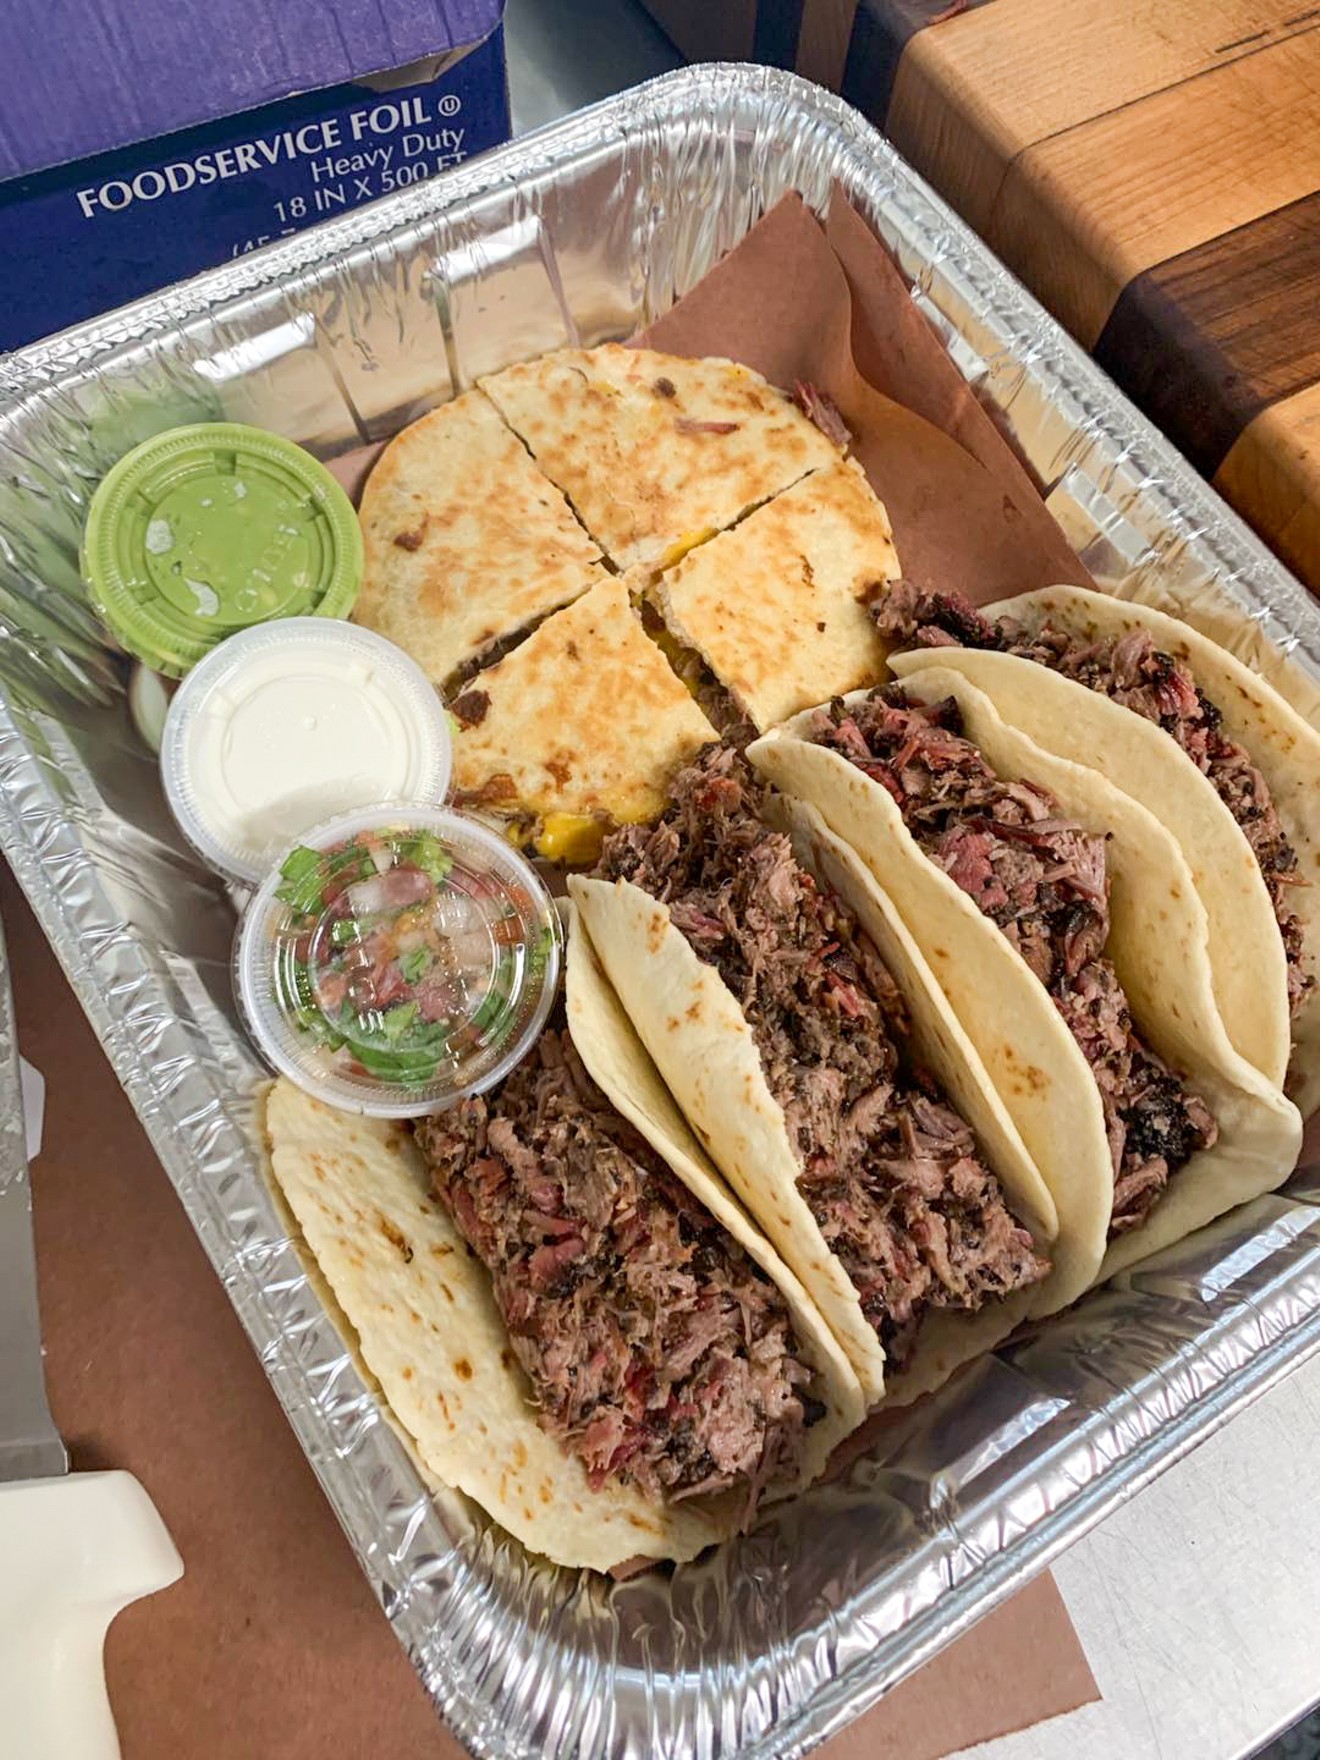 Get tacos and barbecue at Zavala's.